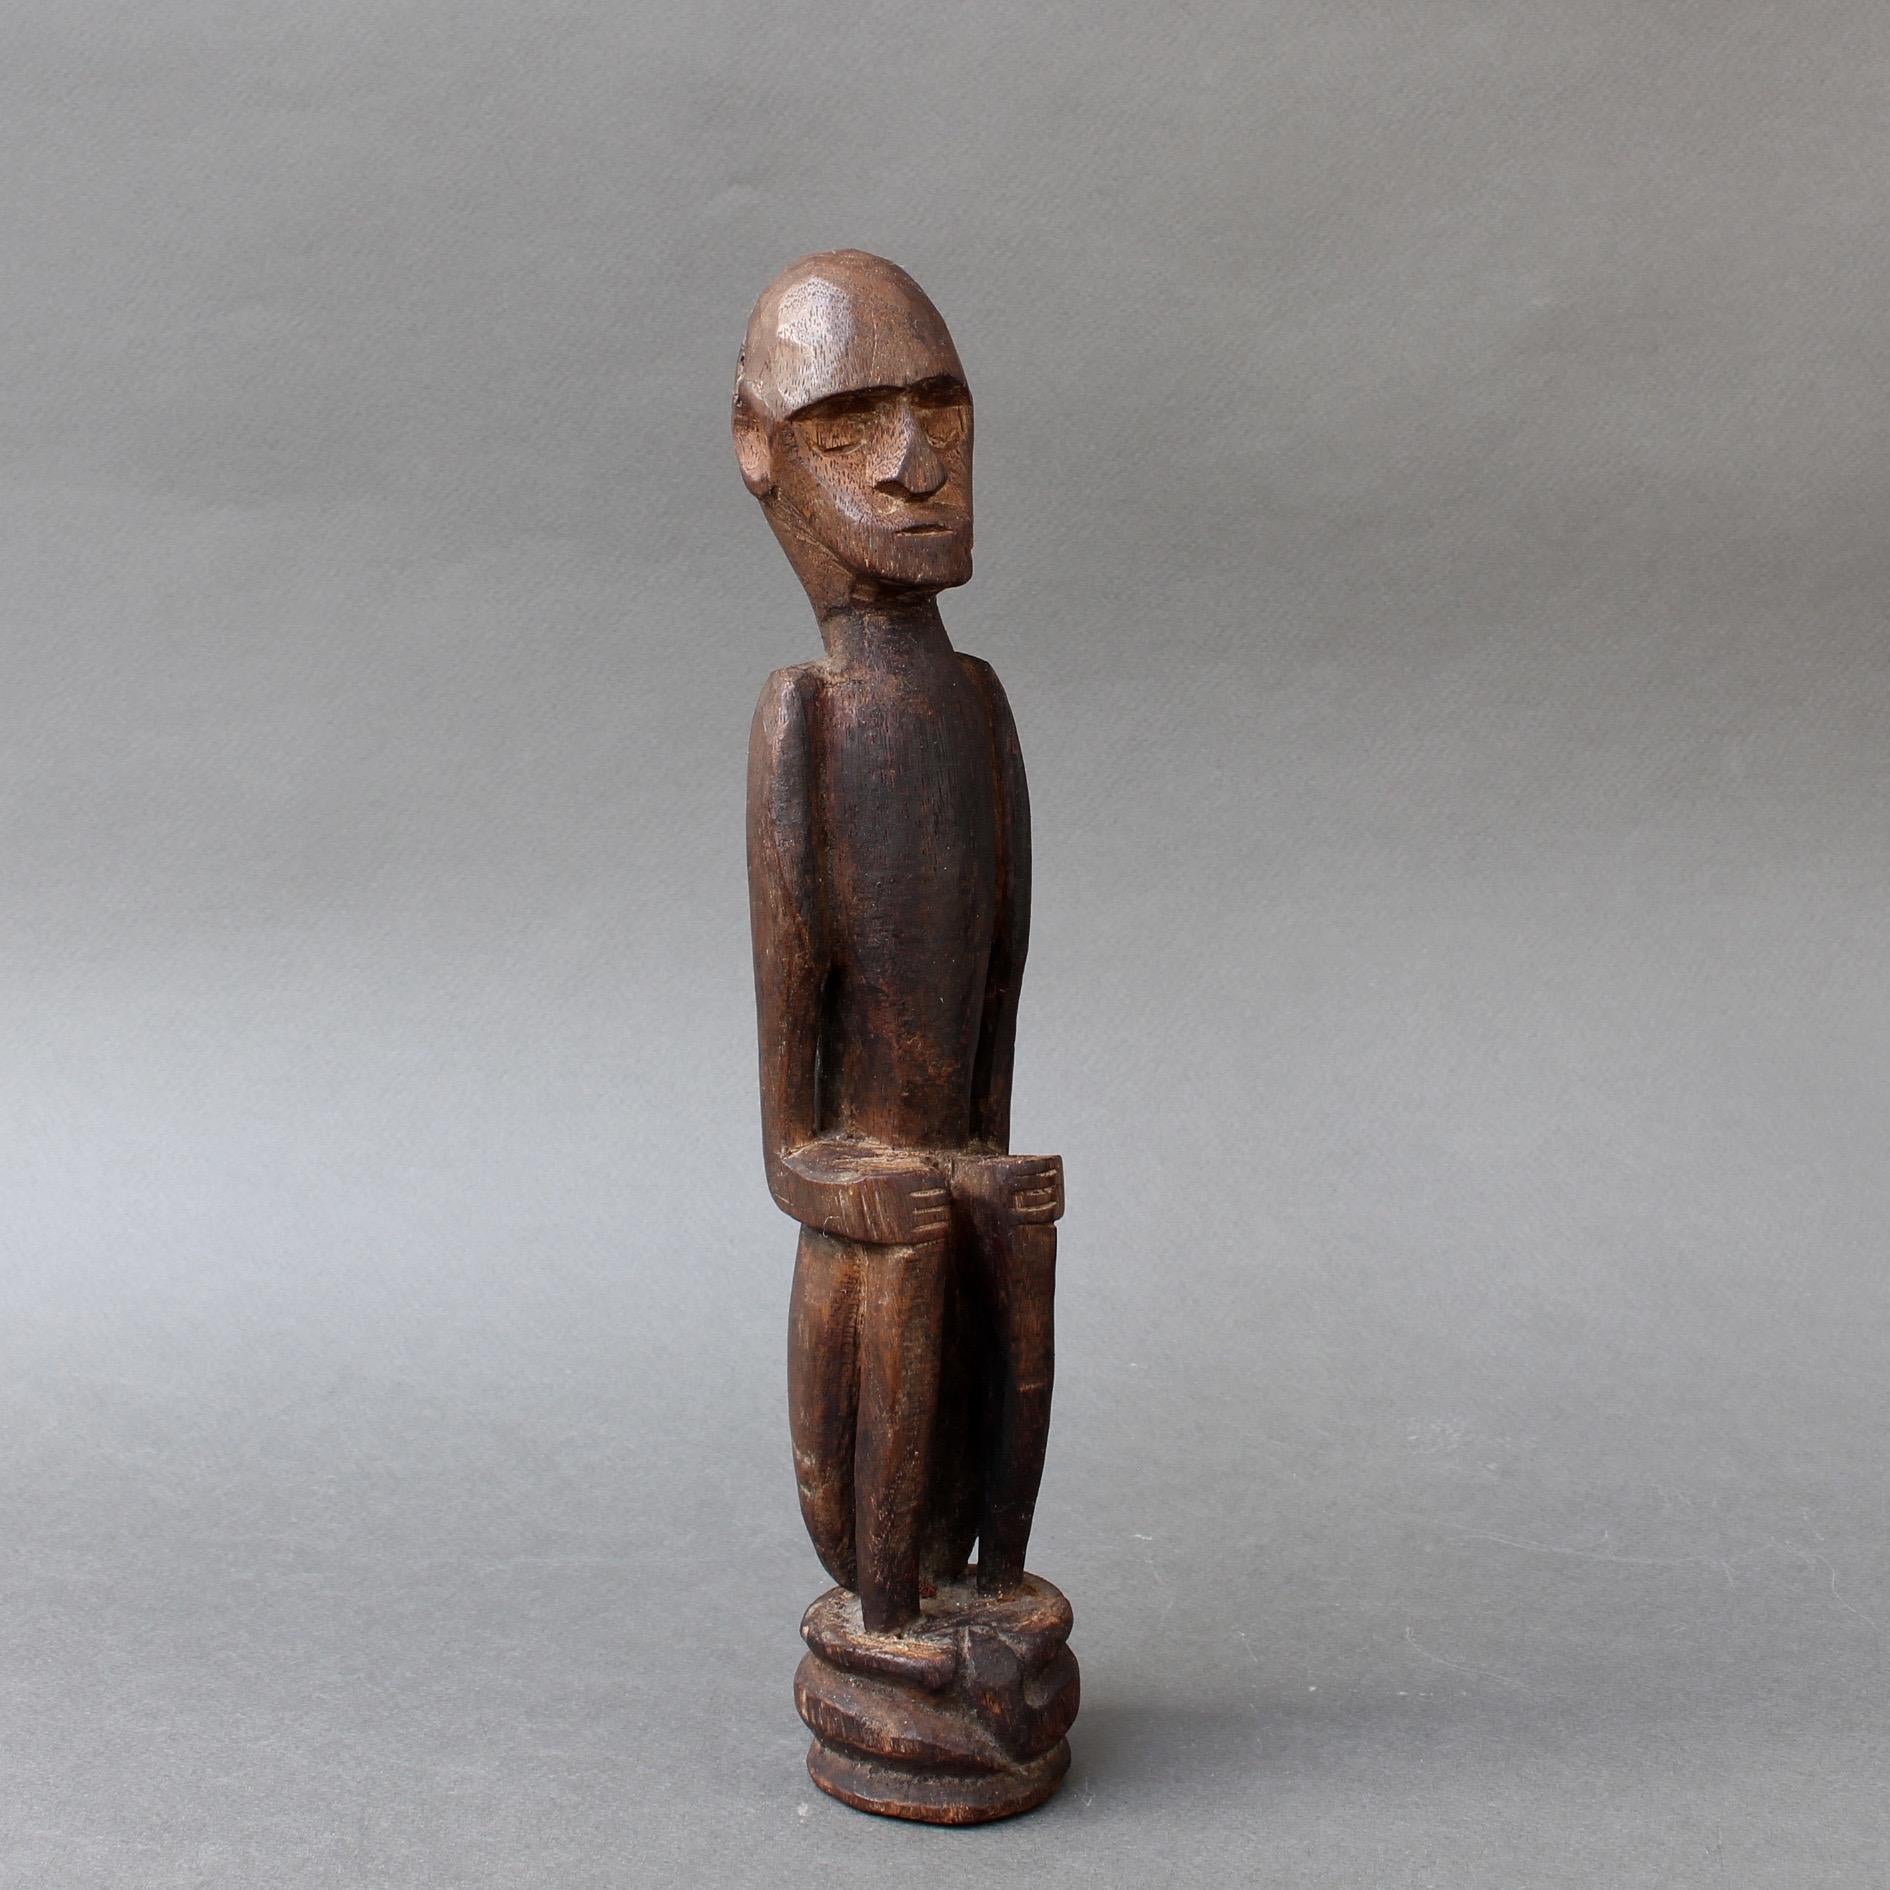 Indonesian Wooden Sculpture or Carving of Sitting Figure from Sumba Island, Indonesia